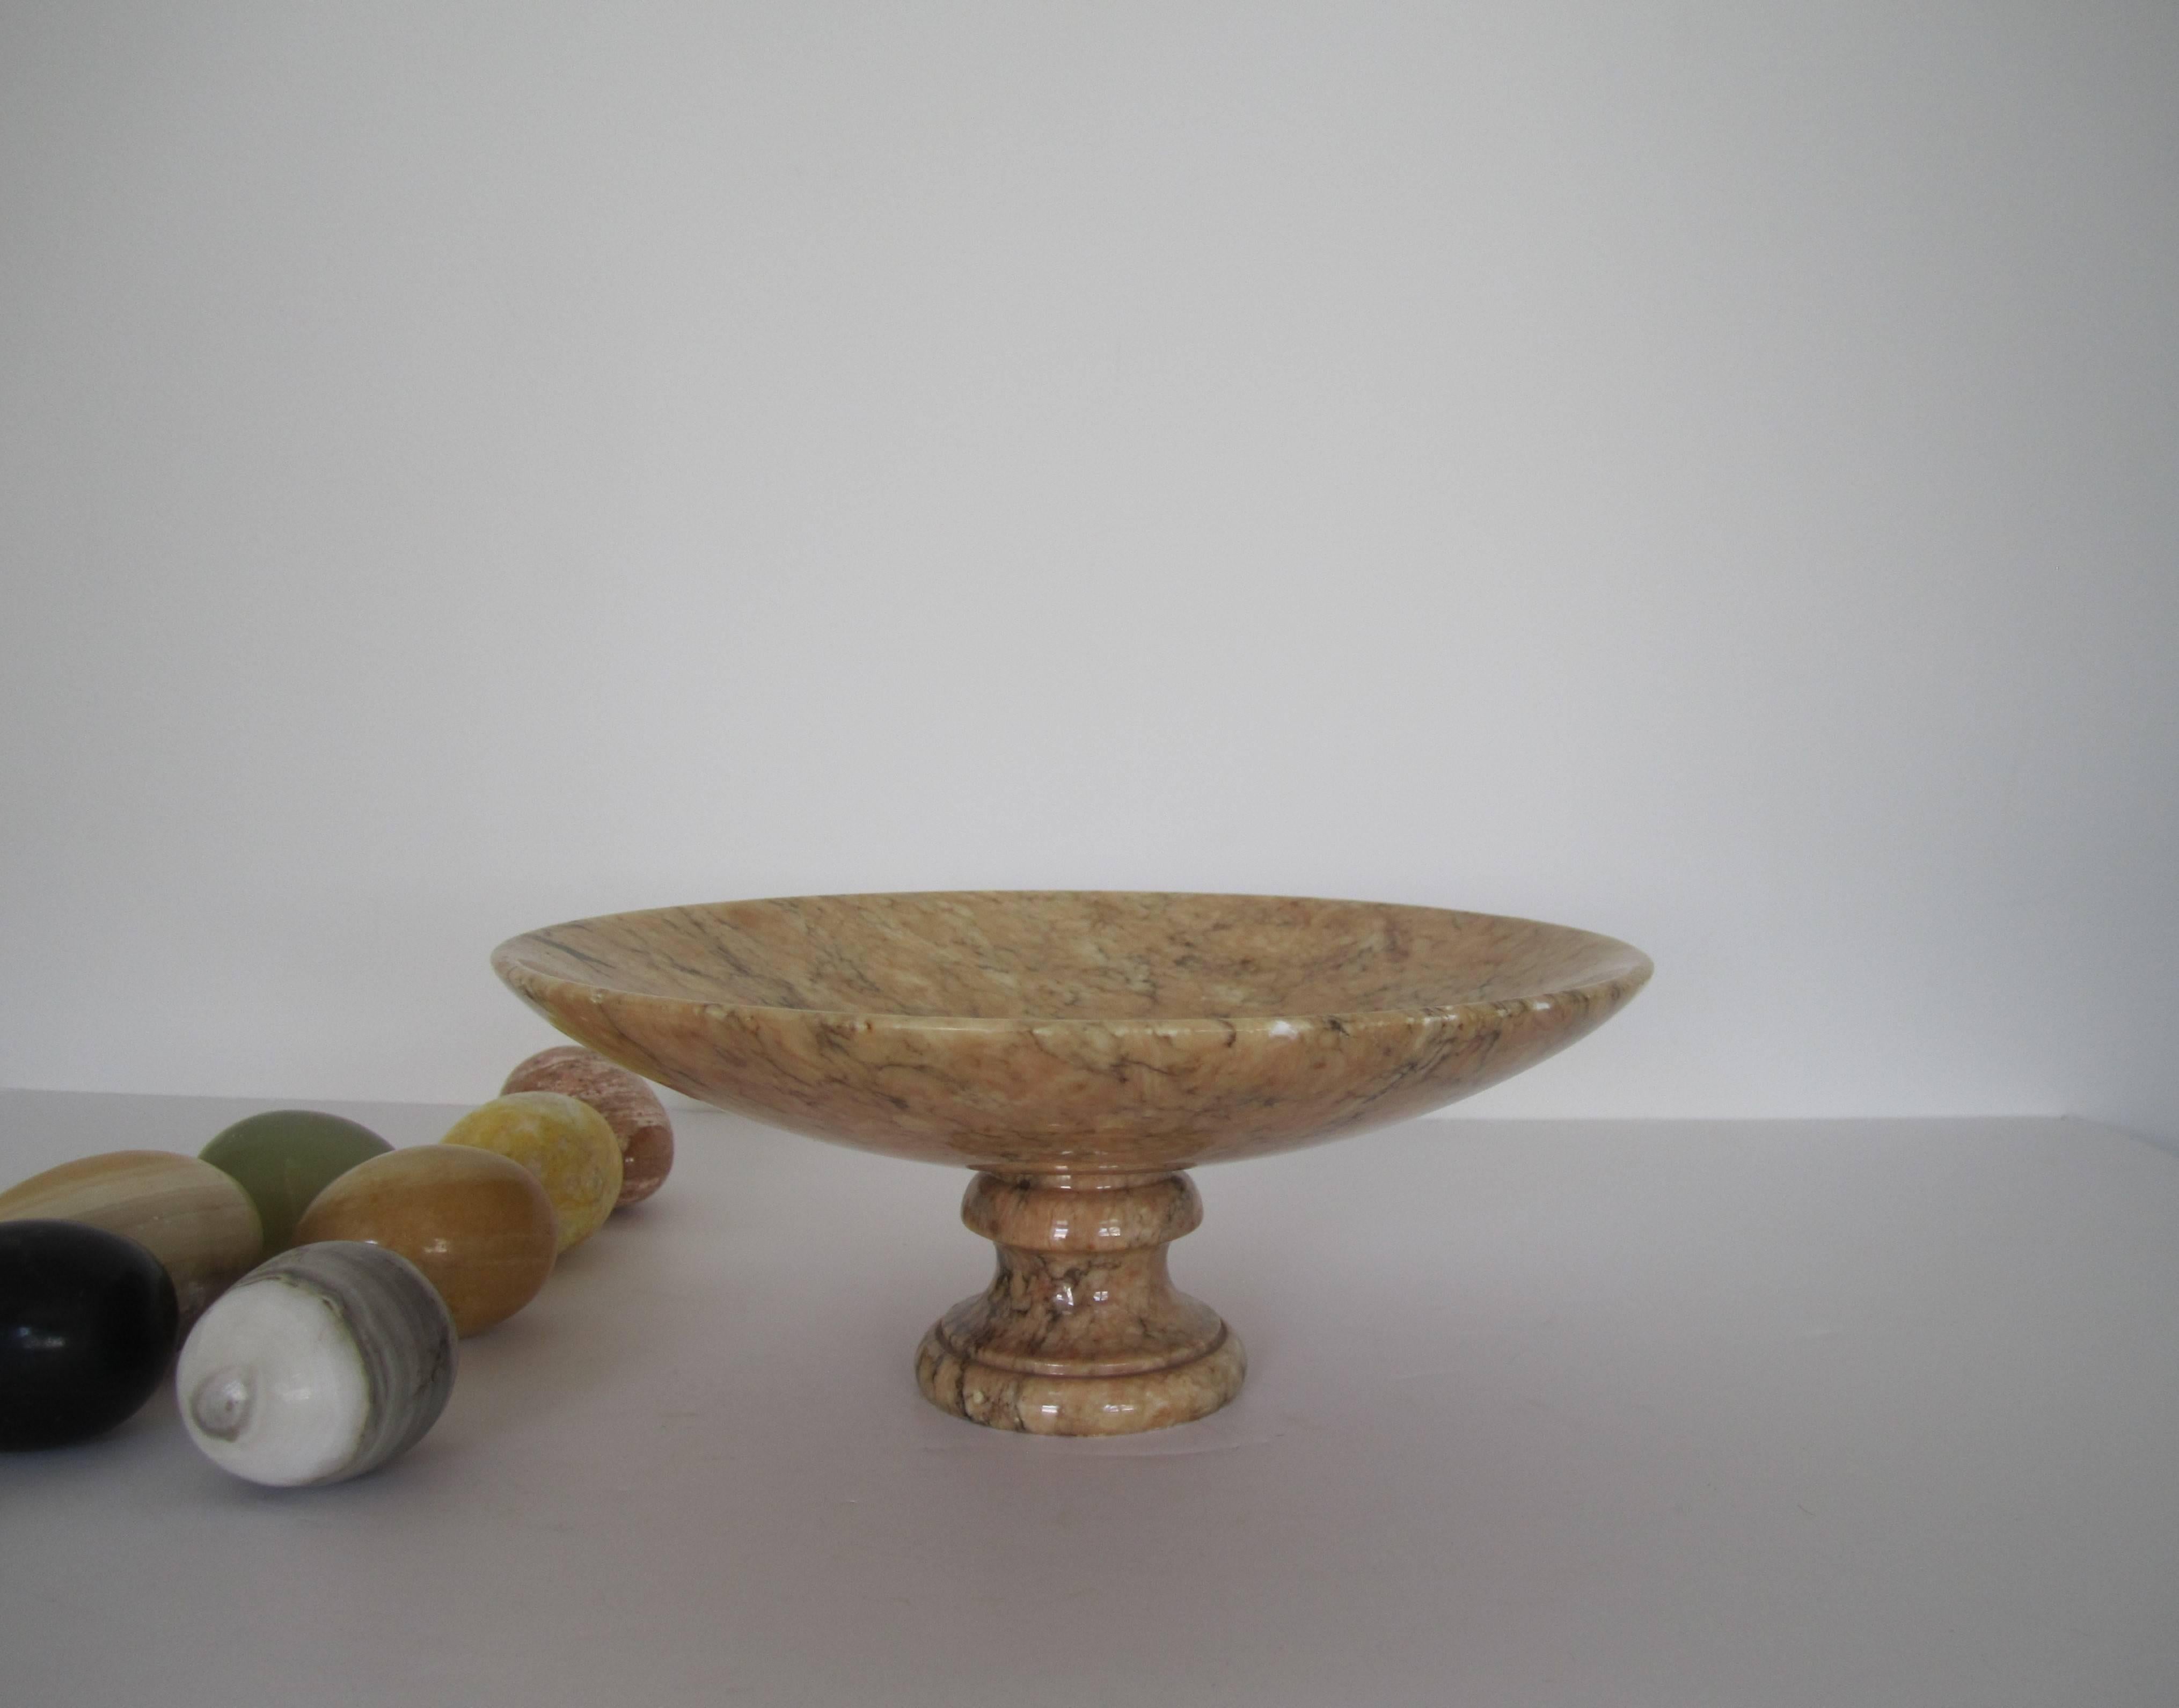 20th Century Vintage Alabaster Tazza Centerpiece with Marble and Onyx Egg Sculptures